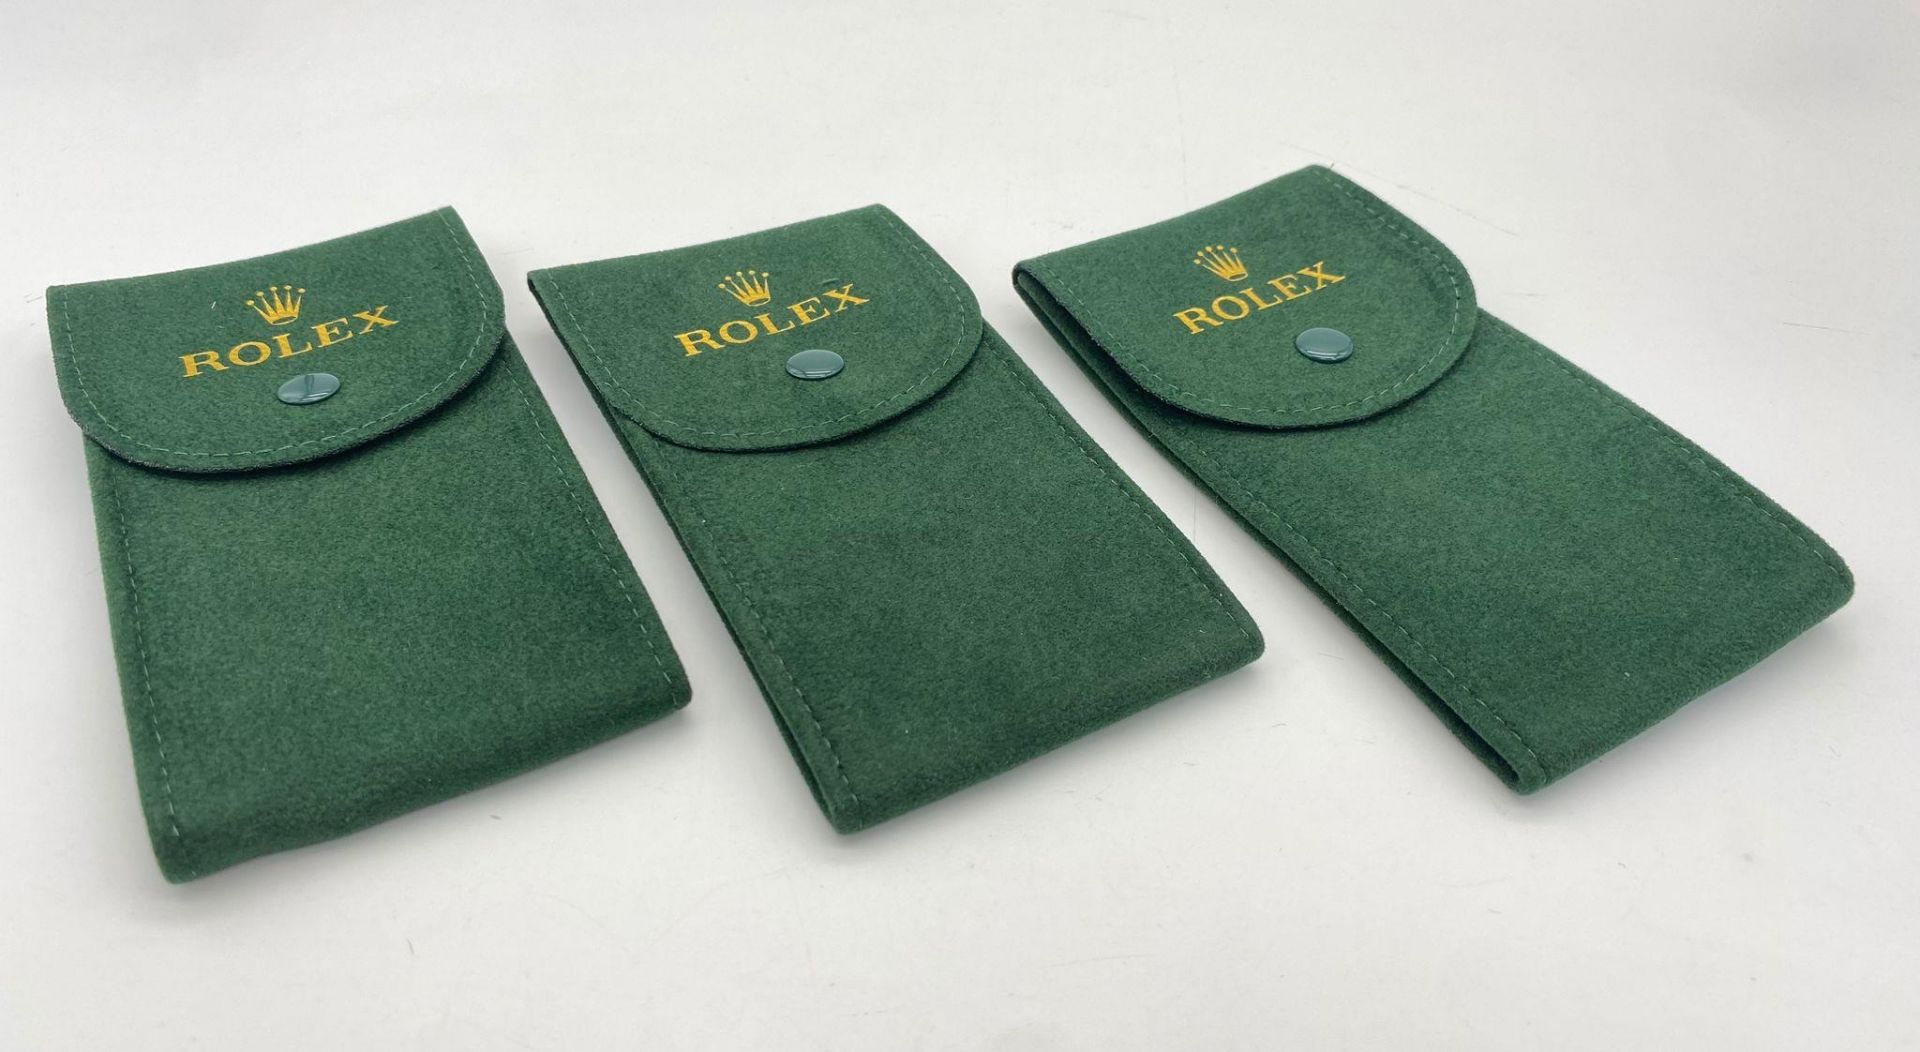 Three ROLEX service pocket pouches ideal for traveling or protecting your valuable watch when not in